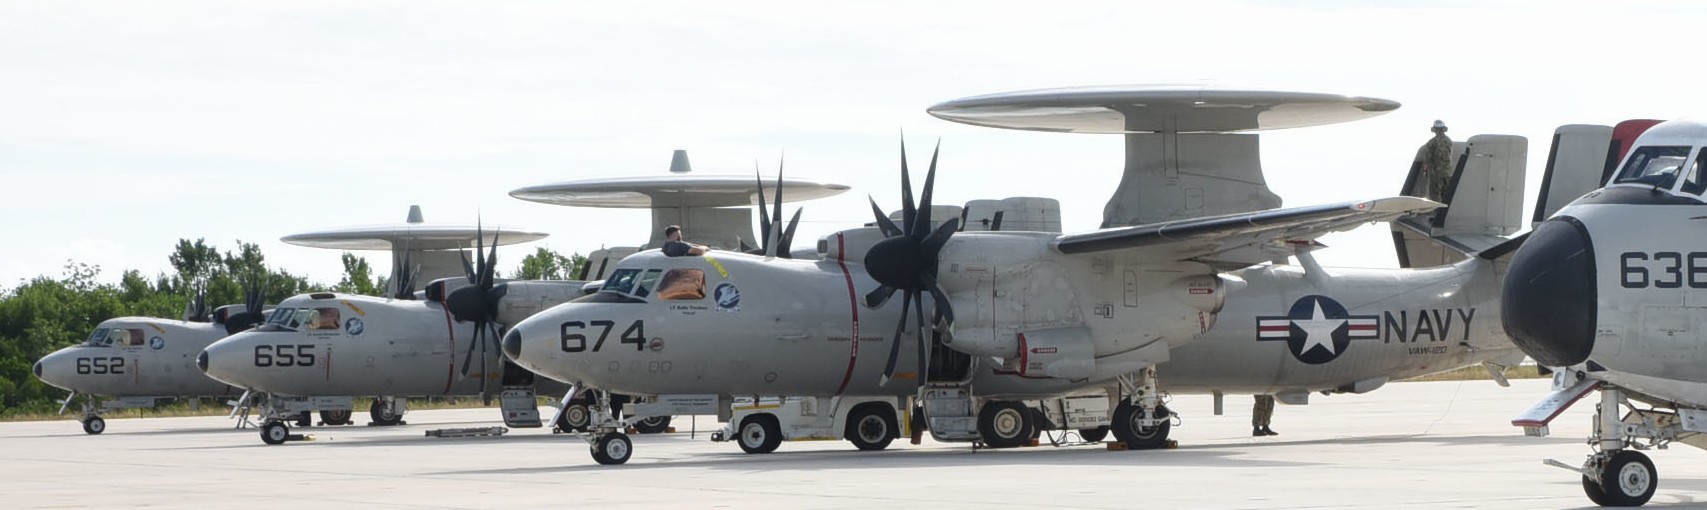 vaw-120 greyhawks carrier airborne early warning squadron e-2d advanced hawkeye replacement nas key west florida 66